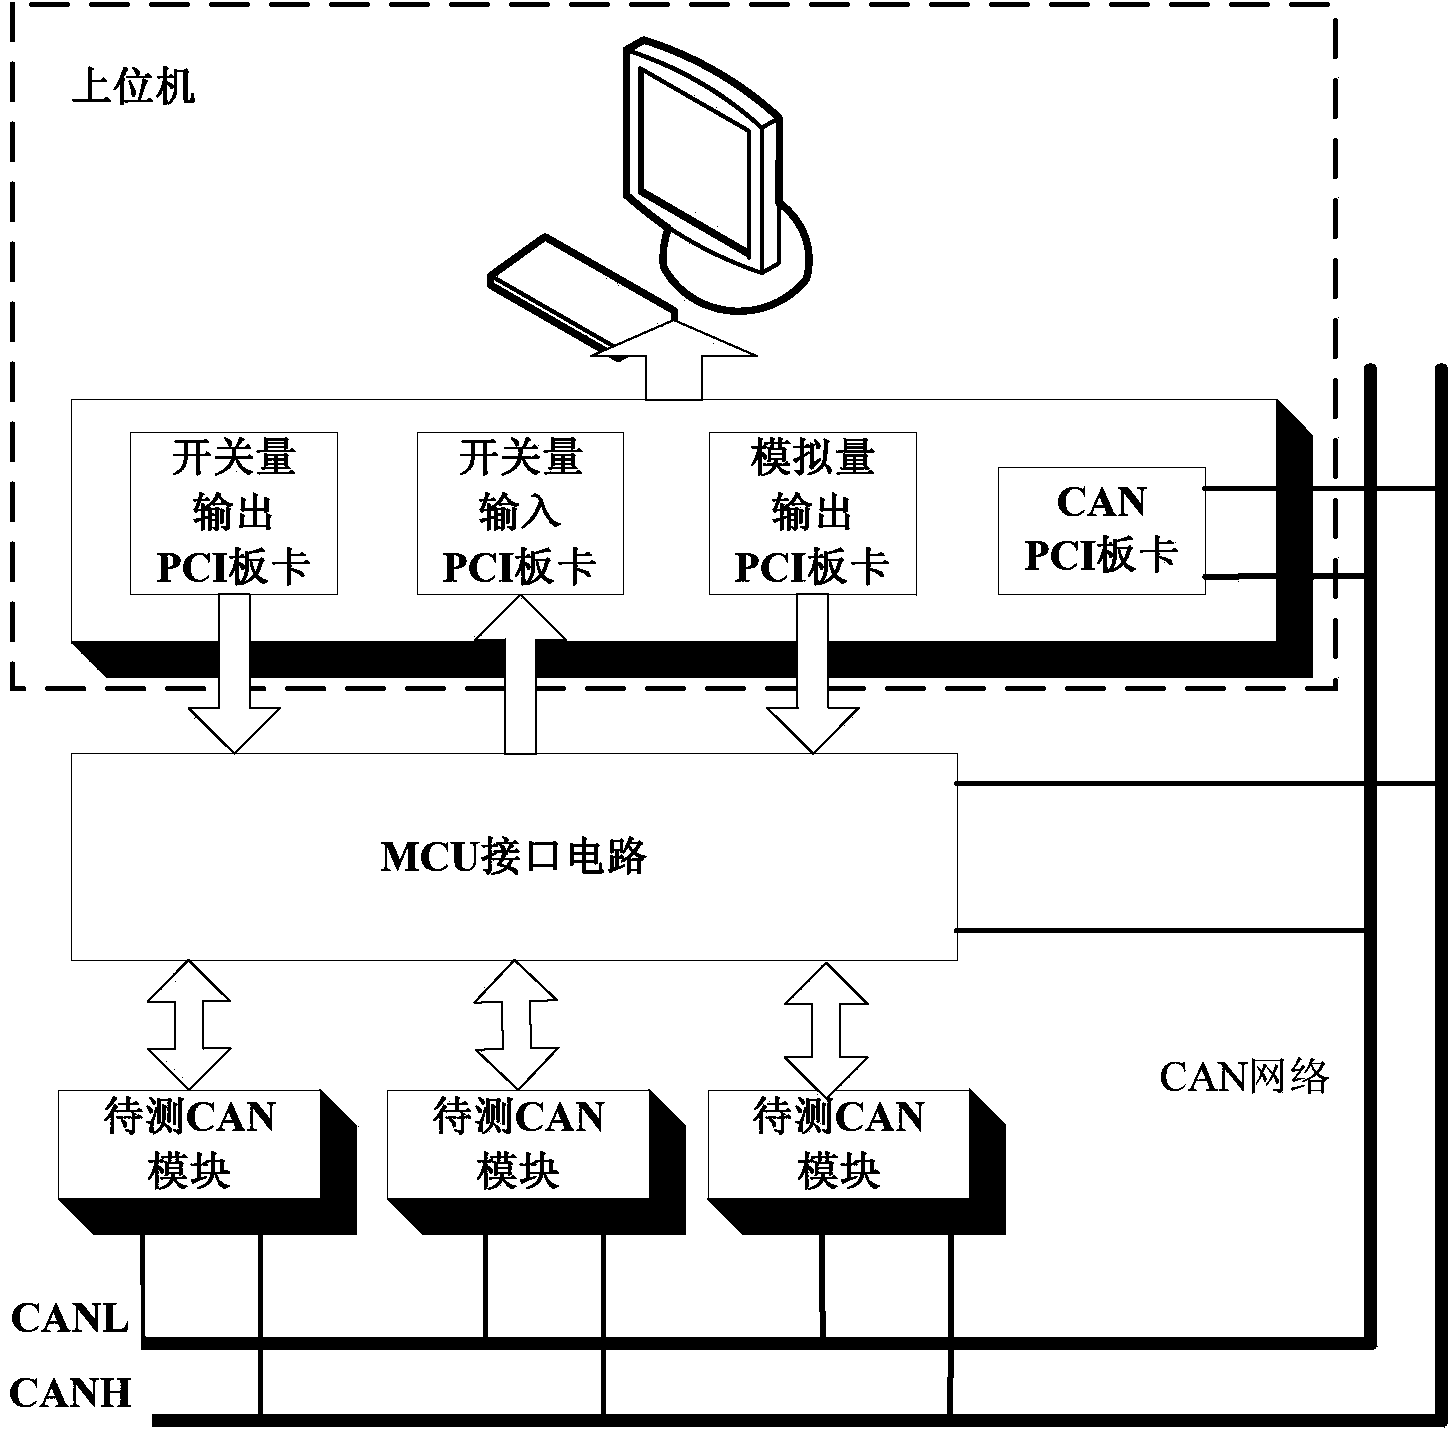 Car CAN bus module fully-automatic detection system and method based on PCI board card